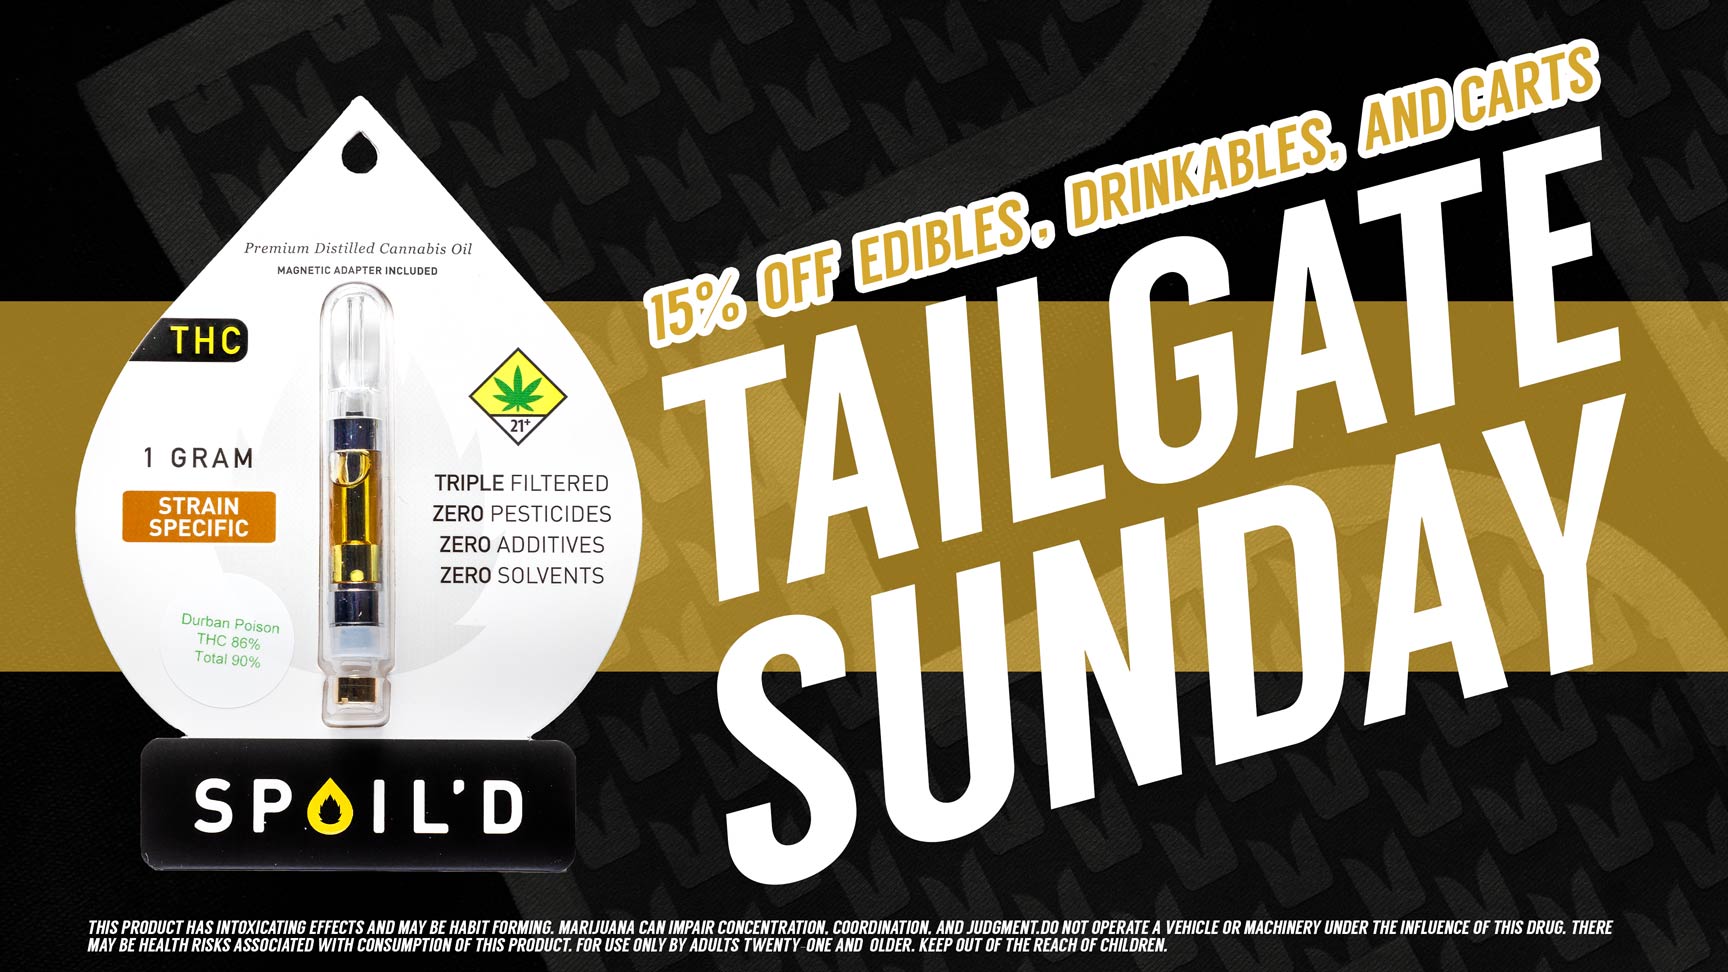 Save 15% every Sunday at Cinder in Spokane on Cartridges, Edibles, and Drinkables